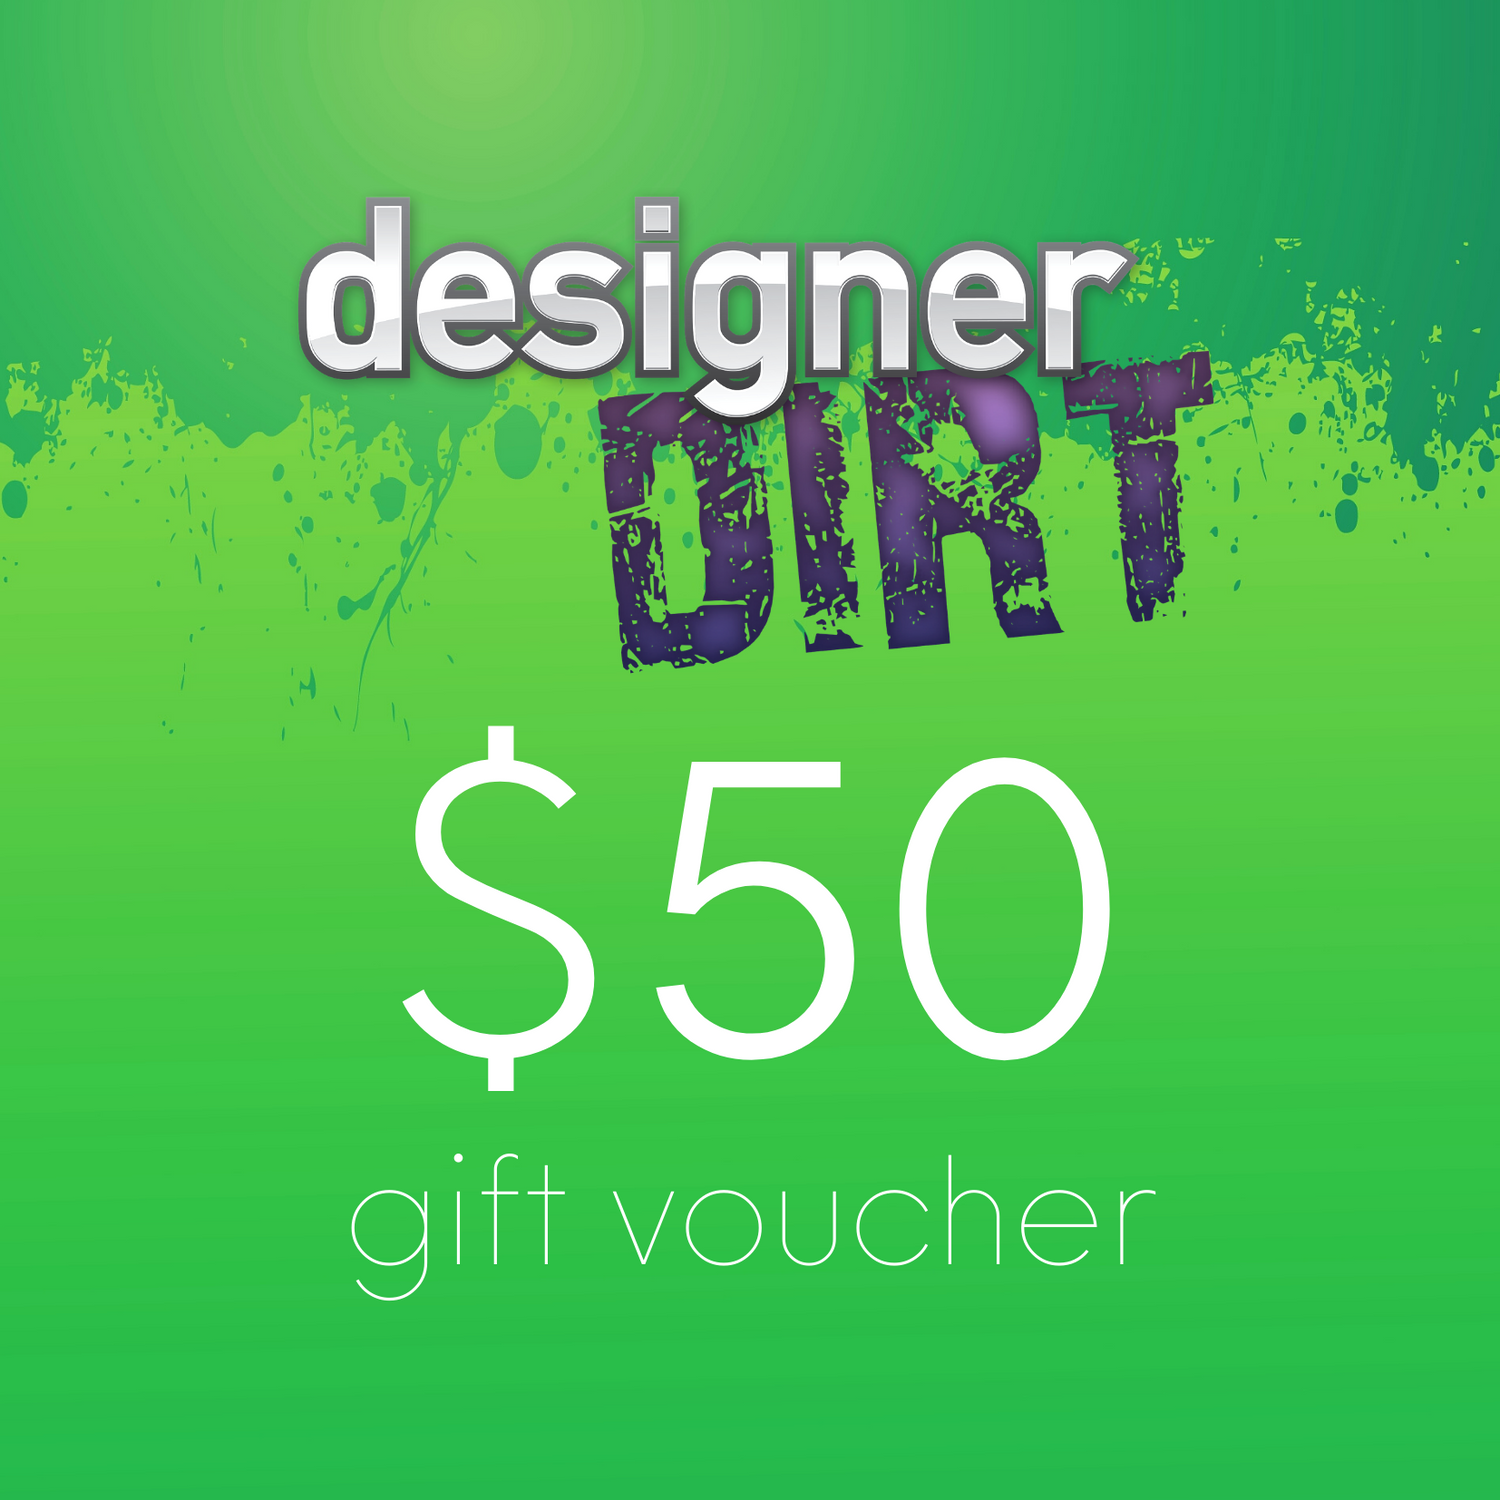 Designer Dirt $50 gift card. Buy a gift certificate or voucher for a present if you can't decide what to buy